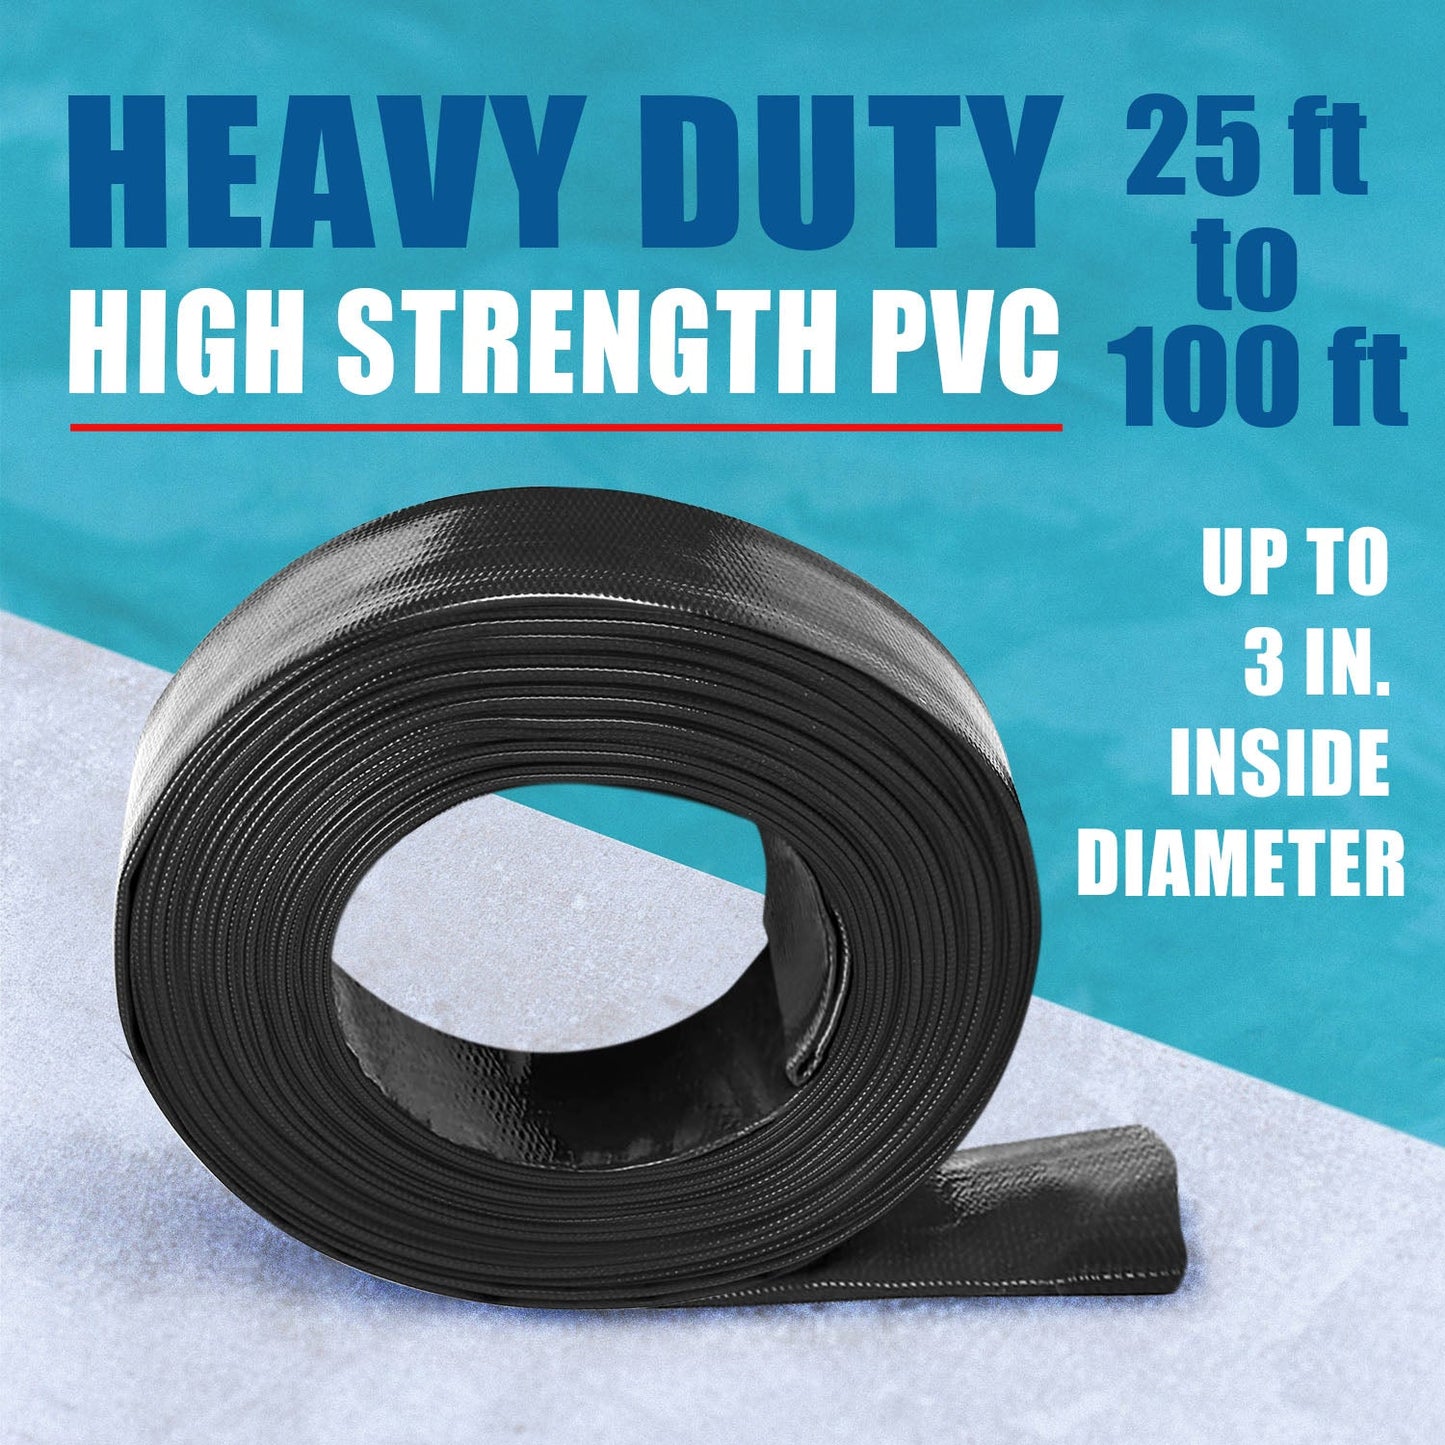 Water Discharge Backwash Pool Hose 2-1/2" 2.5" in inch x 100 FT Black (Open Box)